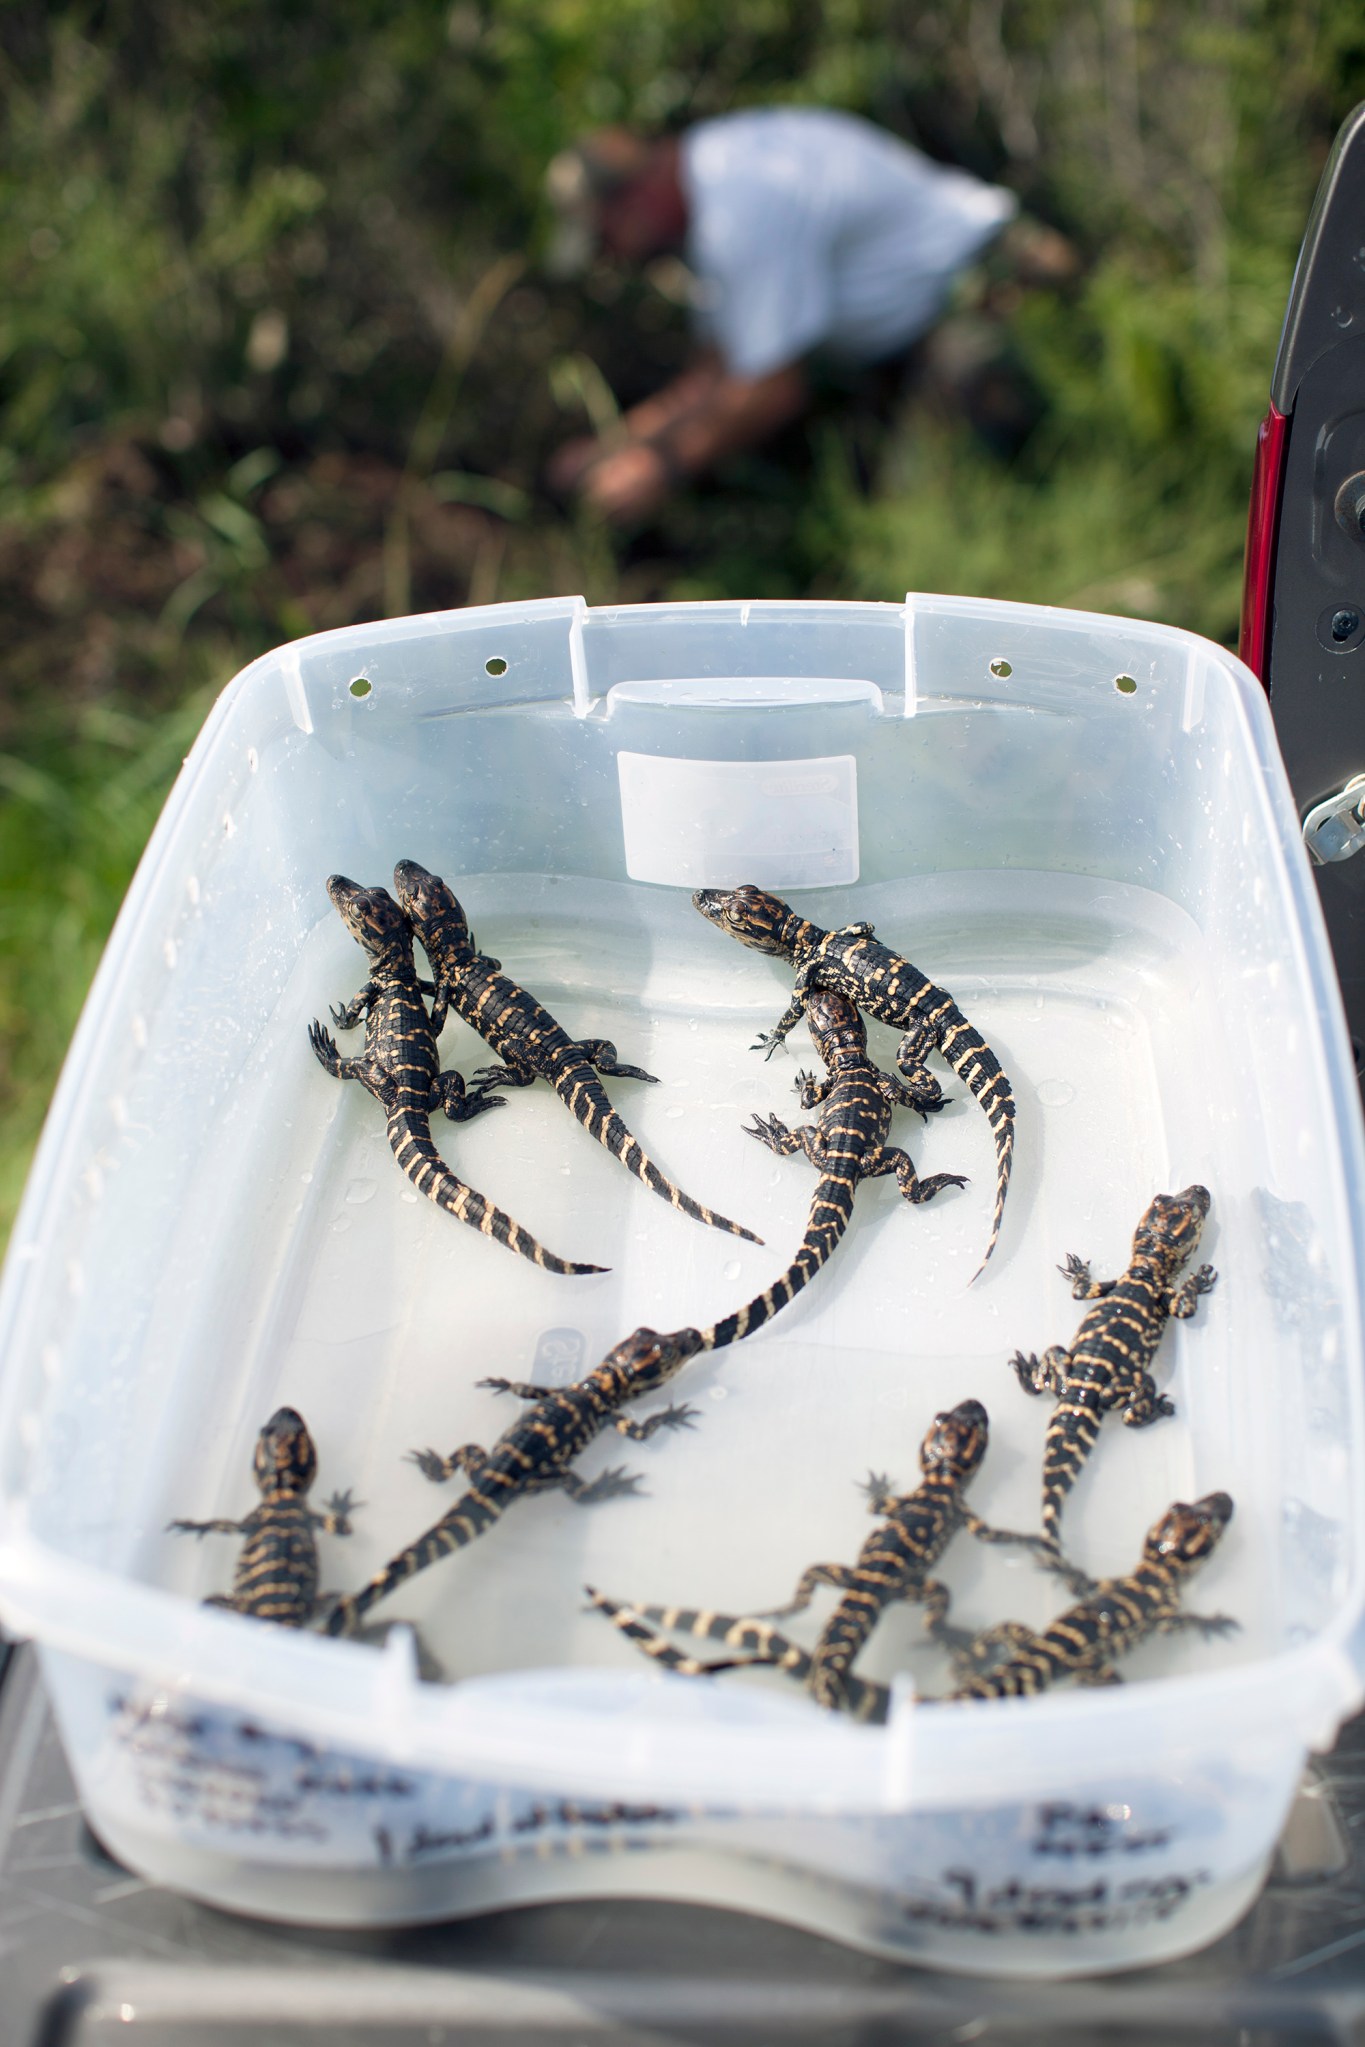 Several baby alligators wait in a plastic container as Lowers prepares to release the recently hatched reptiles.